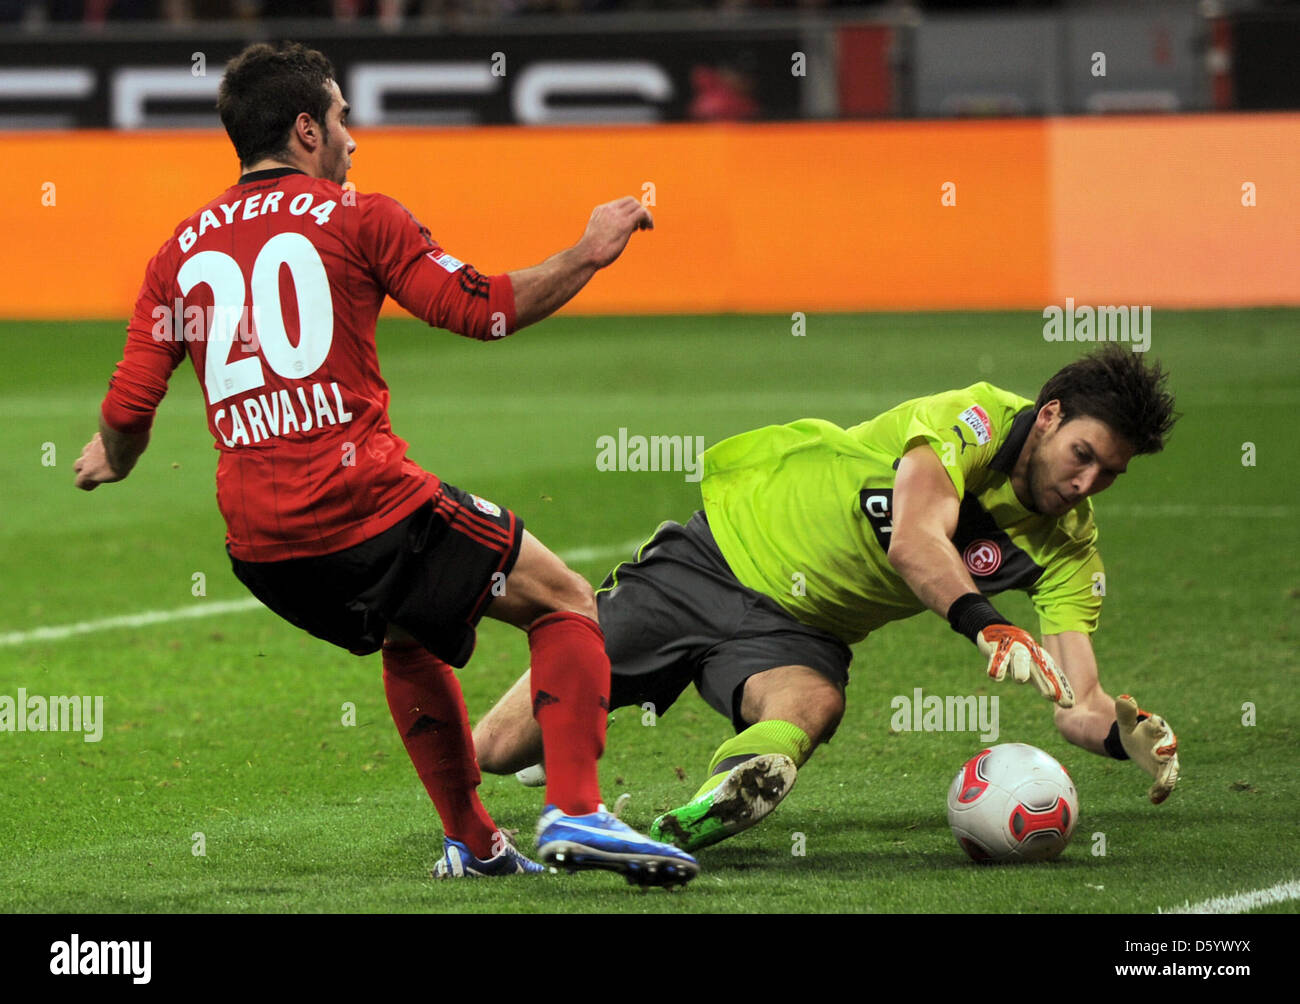 Leverkusen's Daniel Carvajal (L) vies for the ball with Duesseldorf's goalkeeper Fabian Giefer  during the German Bundesliga match between Bayer Leverkusen and Fortuna Duesseldorf at BayArena in Leverkusen, Germany, 04 November 2012. Photo: DANIEL NAUPOLD  (ATTENTION: EMBARGO CONDITIONS! The DFL permits the further  utilisation of up to 15 pictures only (no sequntial pictures or vi Stock Photo